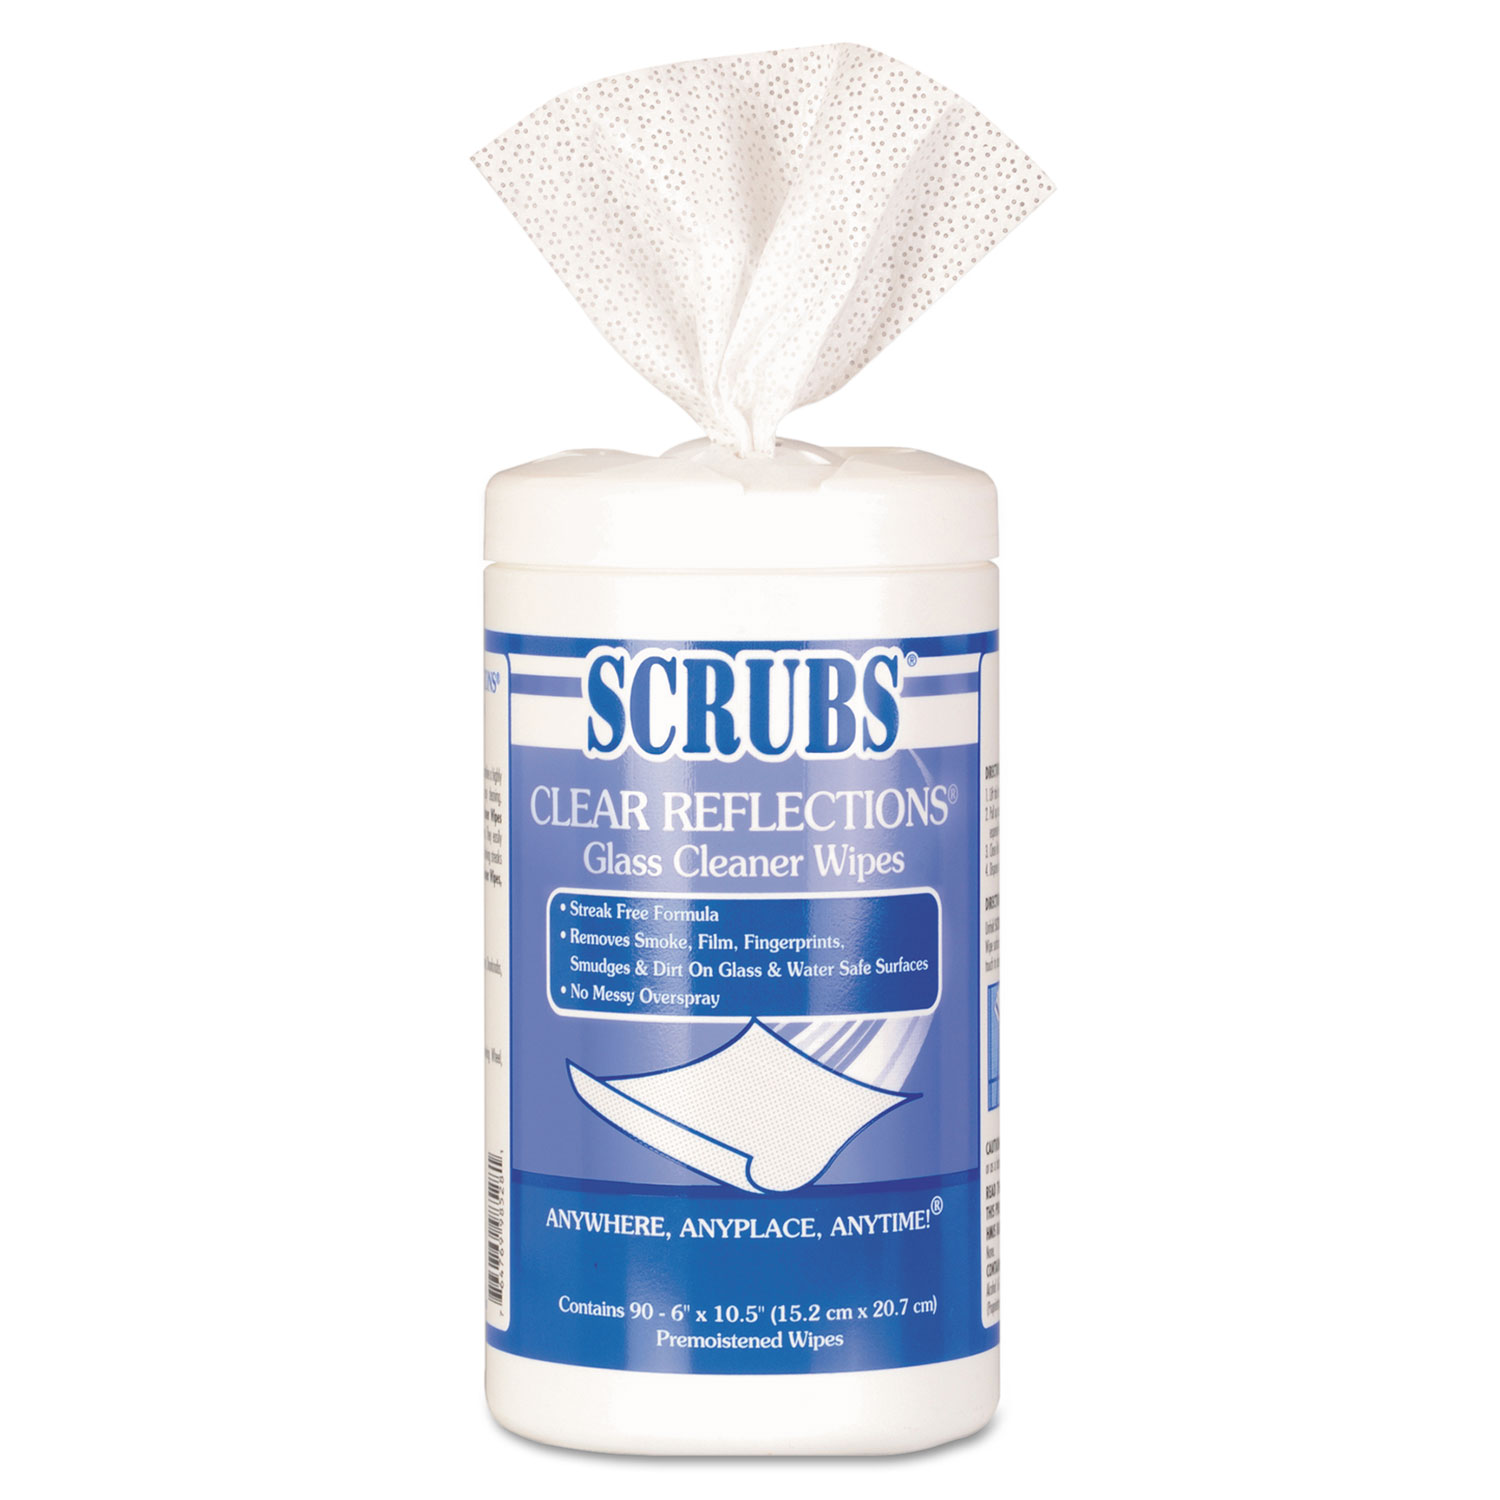  SCRUBS 98528 Glass Cleaner Wipes, 6 x 10 1/2, White, 90 Canister/Pack, 6 Cans/Carton (ITW98528) 